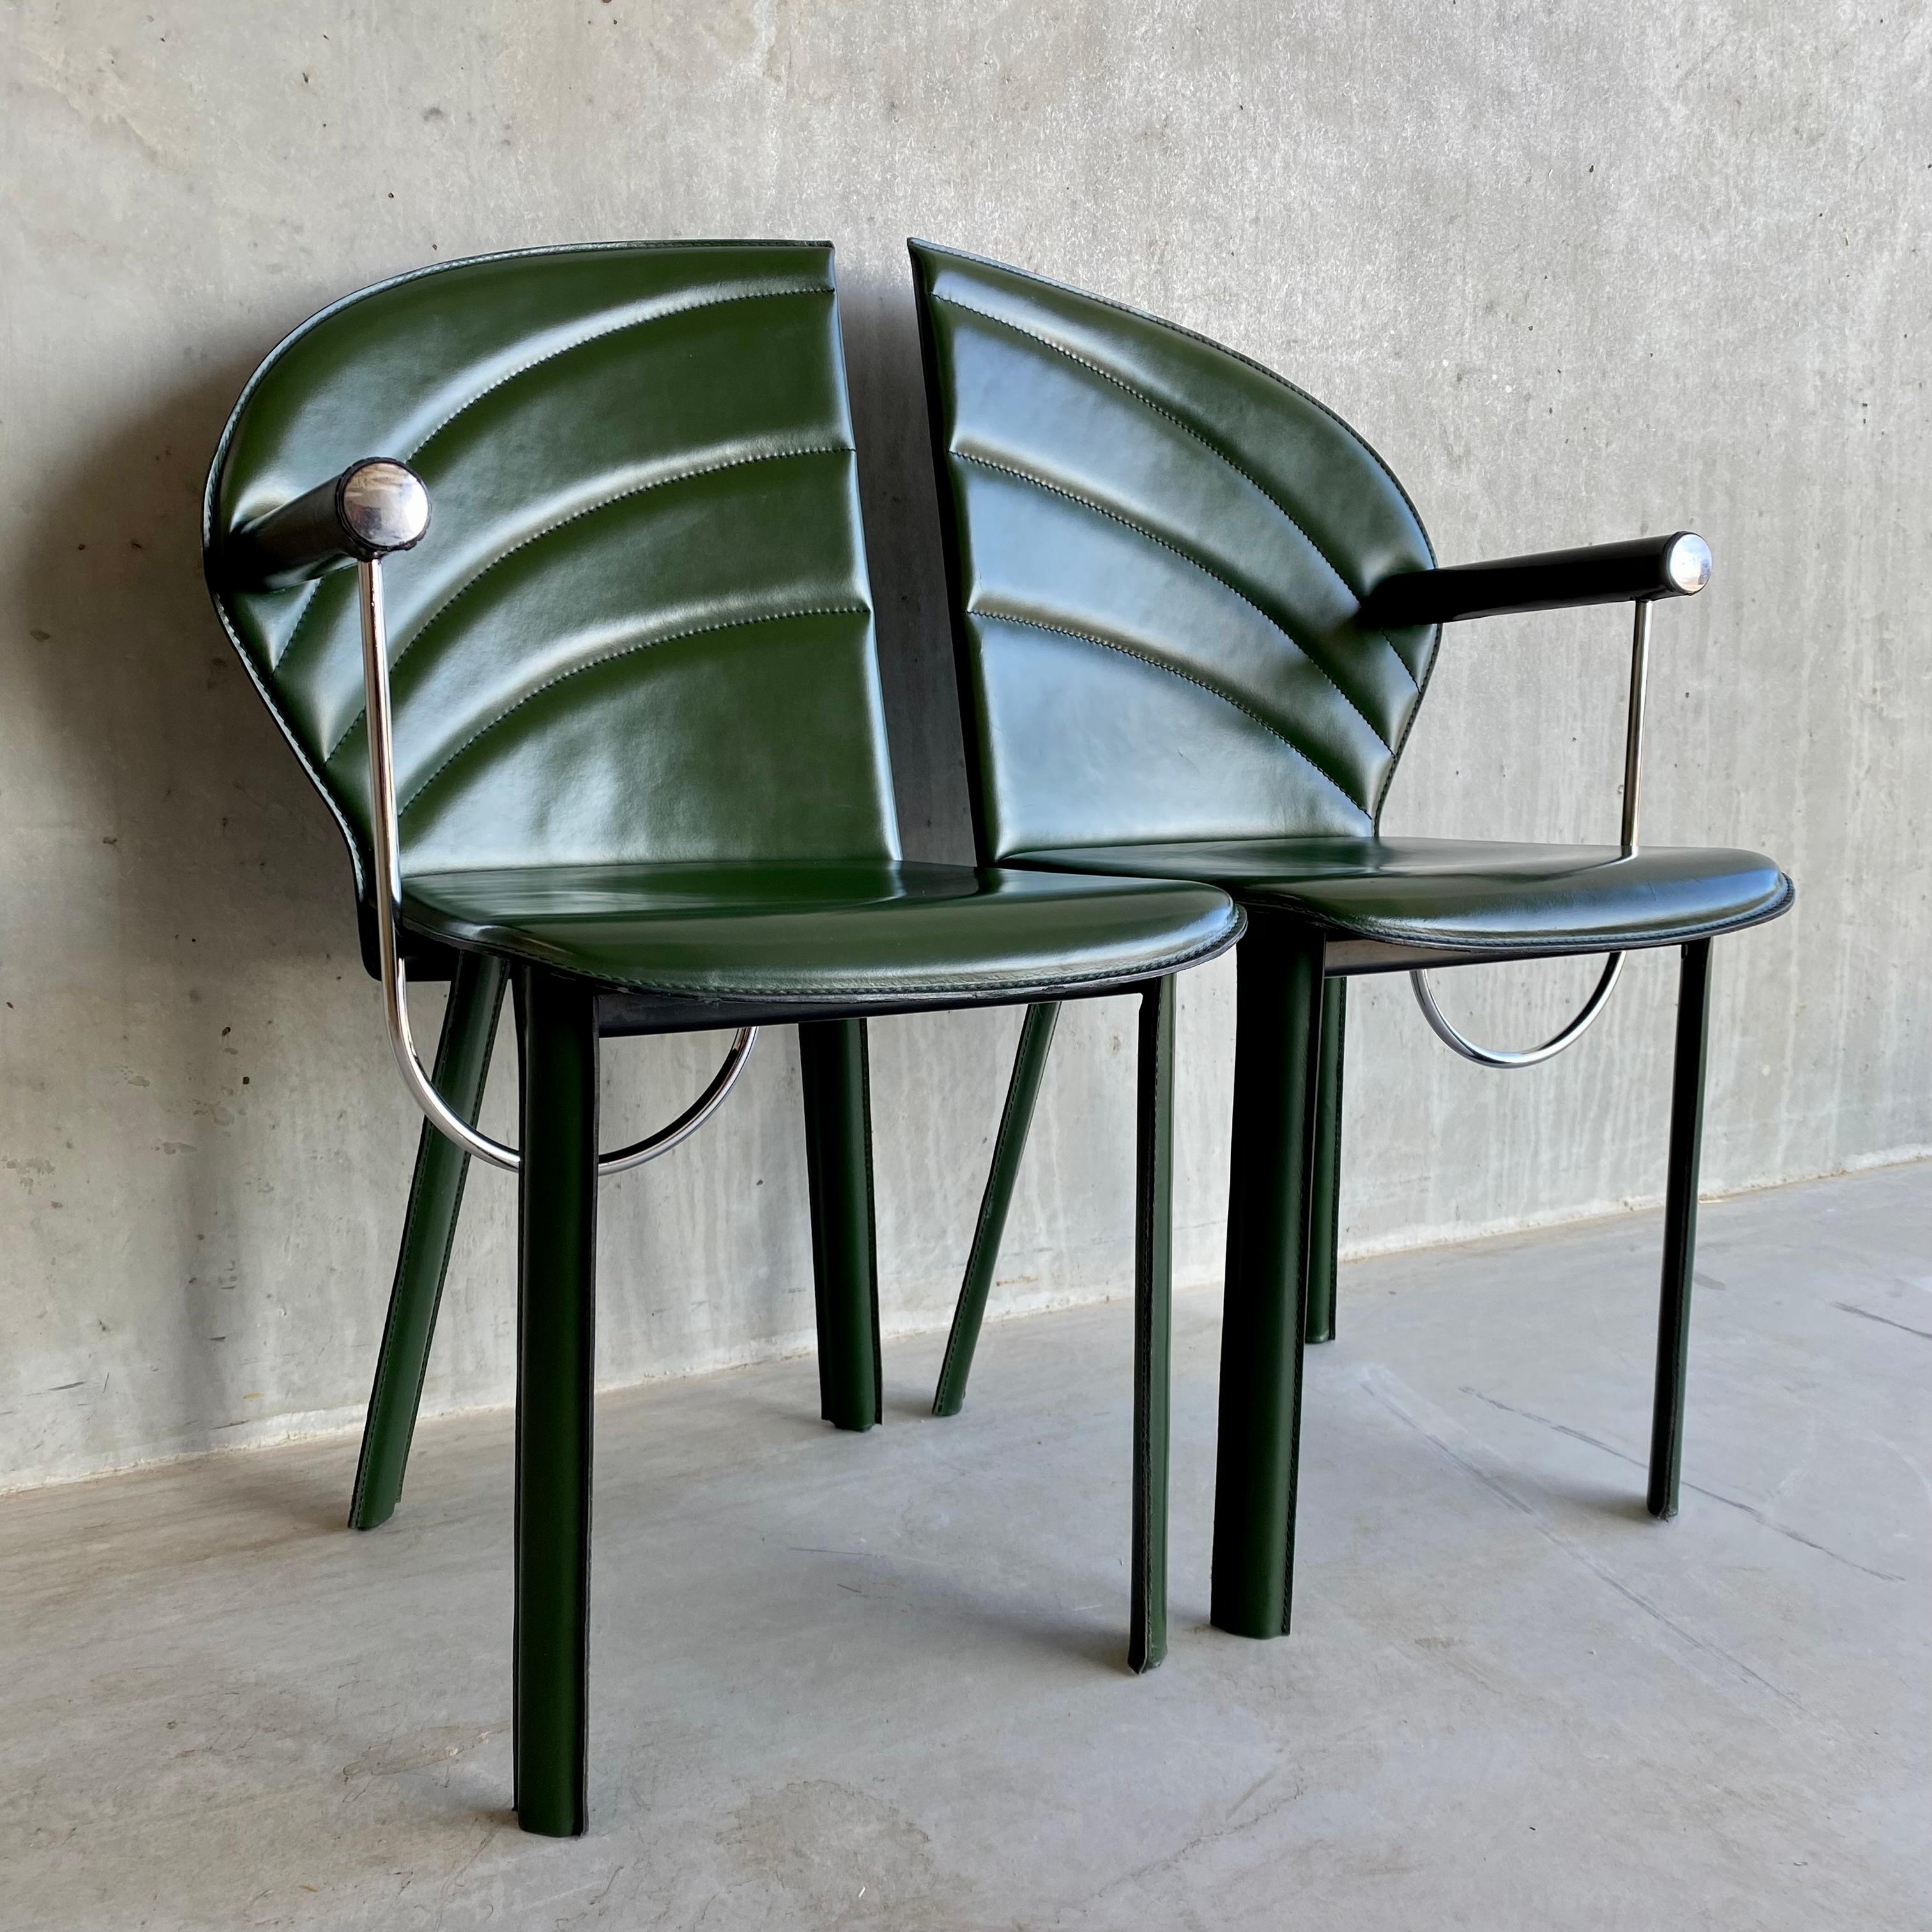 Set of 2 green leather arm chairs by Mario Morbidelli for Naos, Italy 1980S

Know-how is an art, something that is acquired over time. From the original industrial design project born FROM the idea of movement, Naos Action Design distinguished